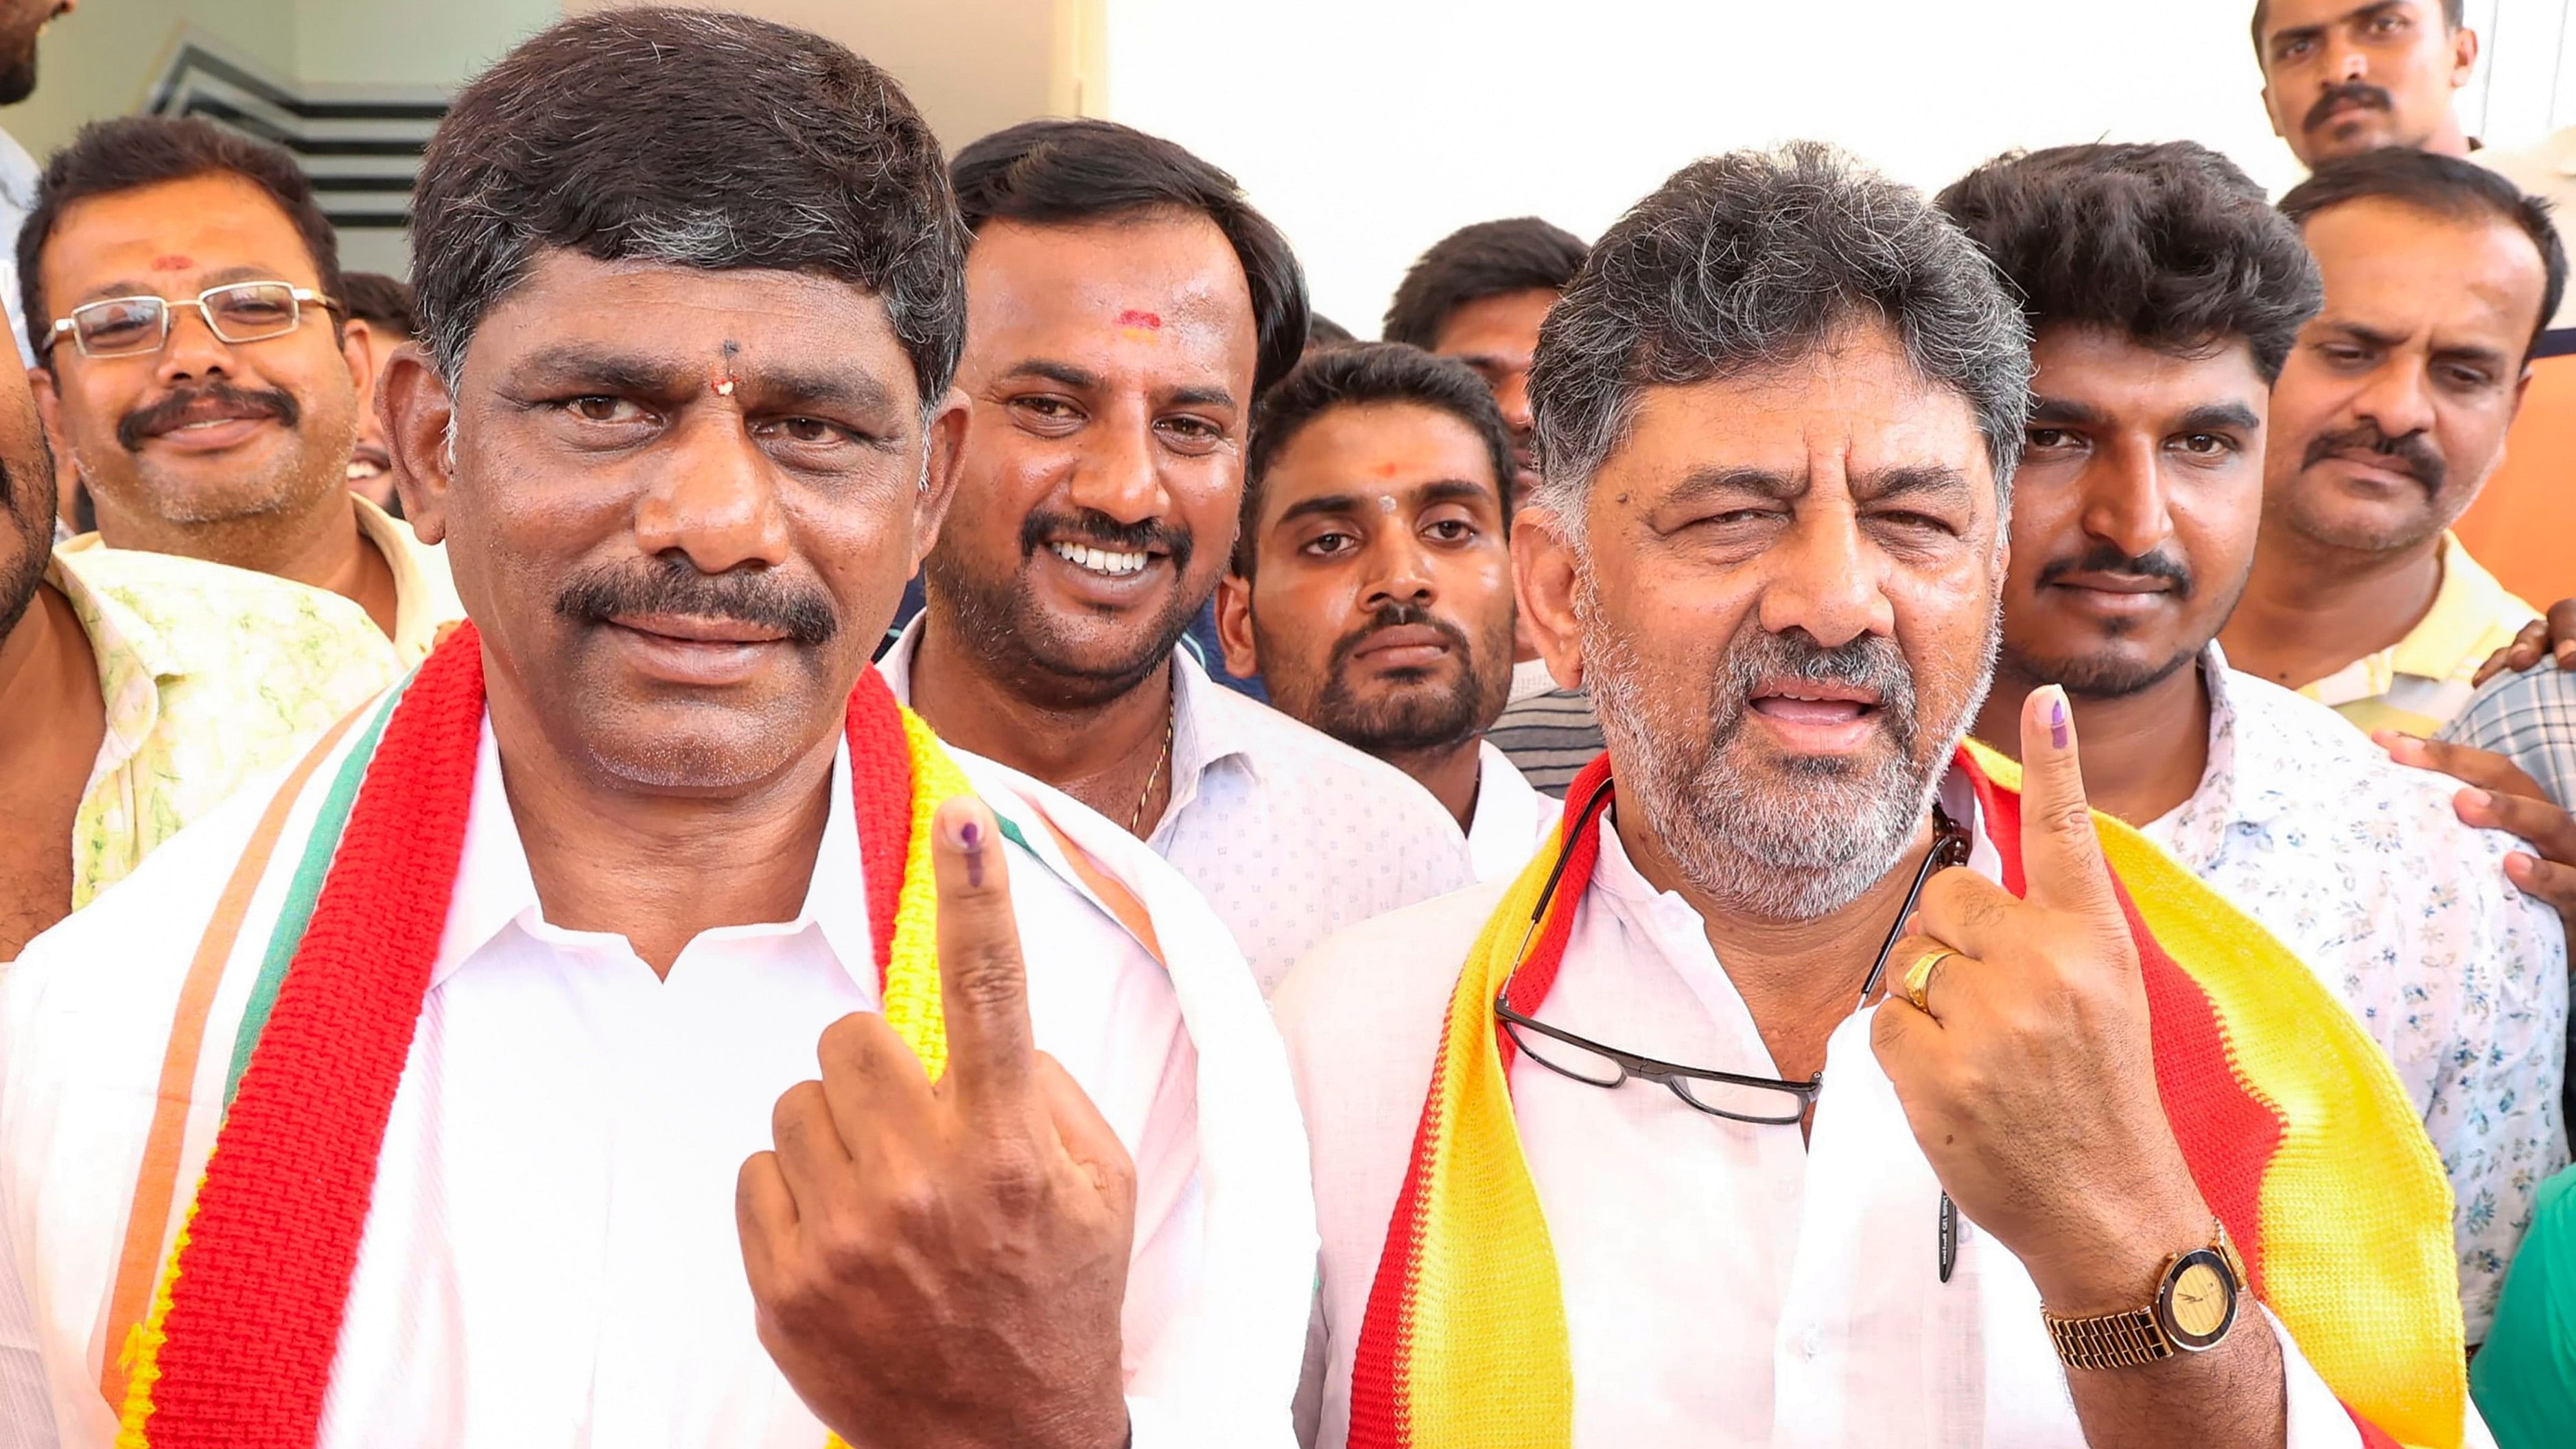 <div class="paragraphs"><p>Karnataka Dy CM D K Shivakumar and his brother D K Suresh show their fingers marked with indelible ink after casting their votes for the 2nd phase of Lok Sabha elections, in Kanakpura.</p></div>